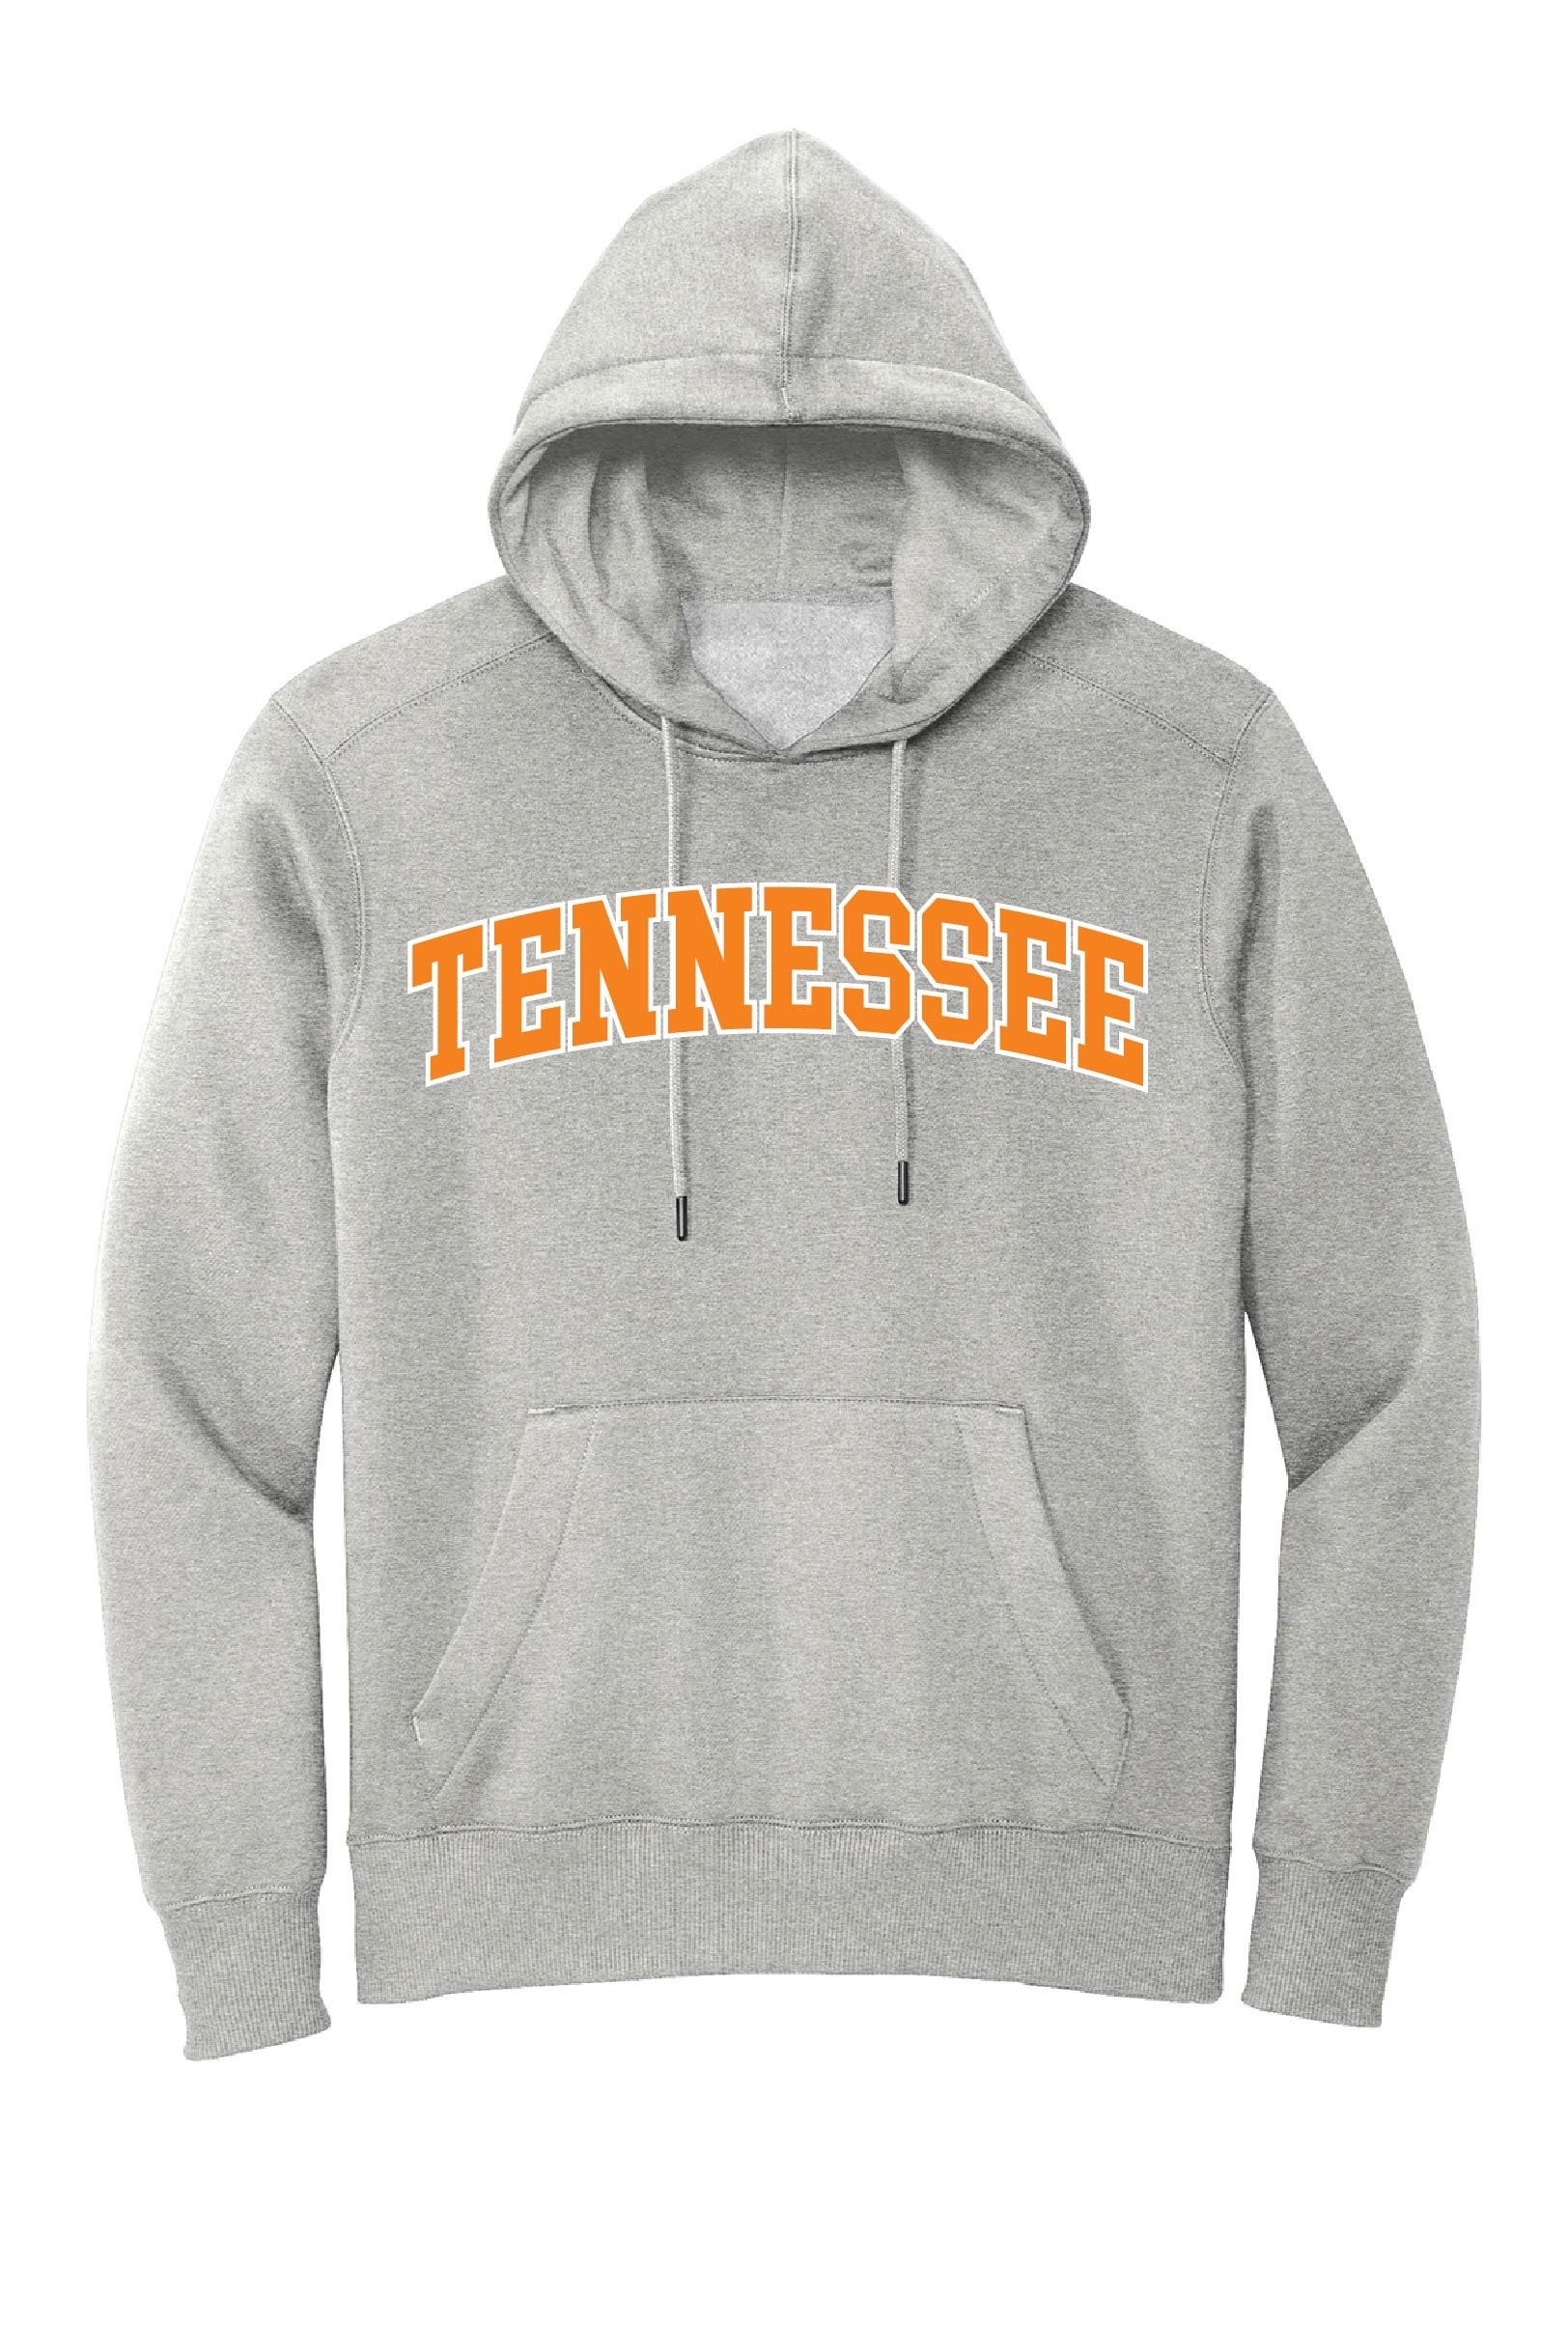 Tennessee hoodie cute trendy gift warm soft cozy | Etsy